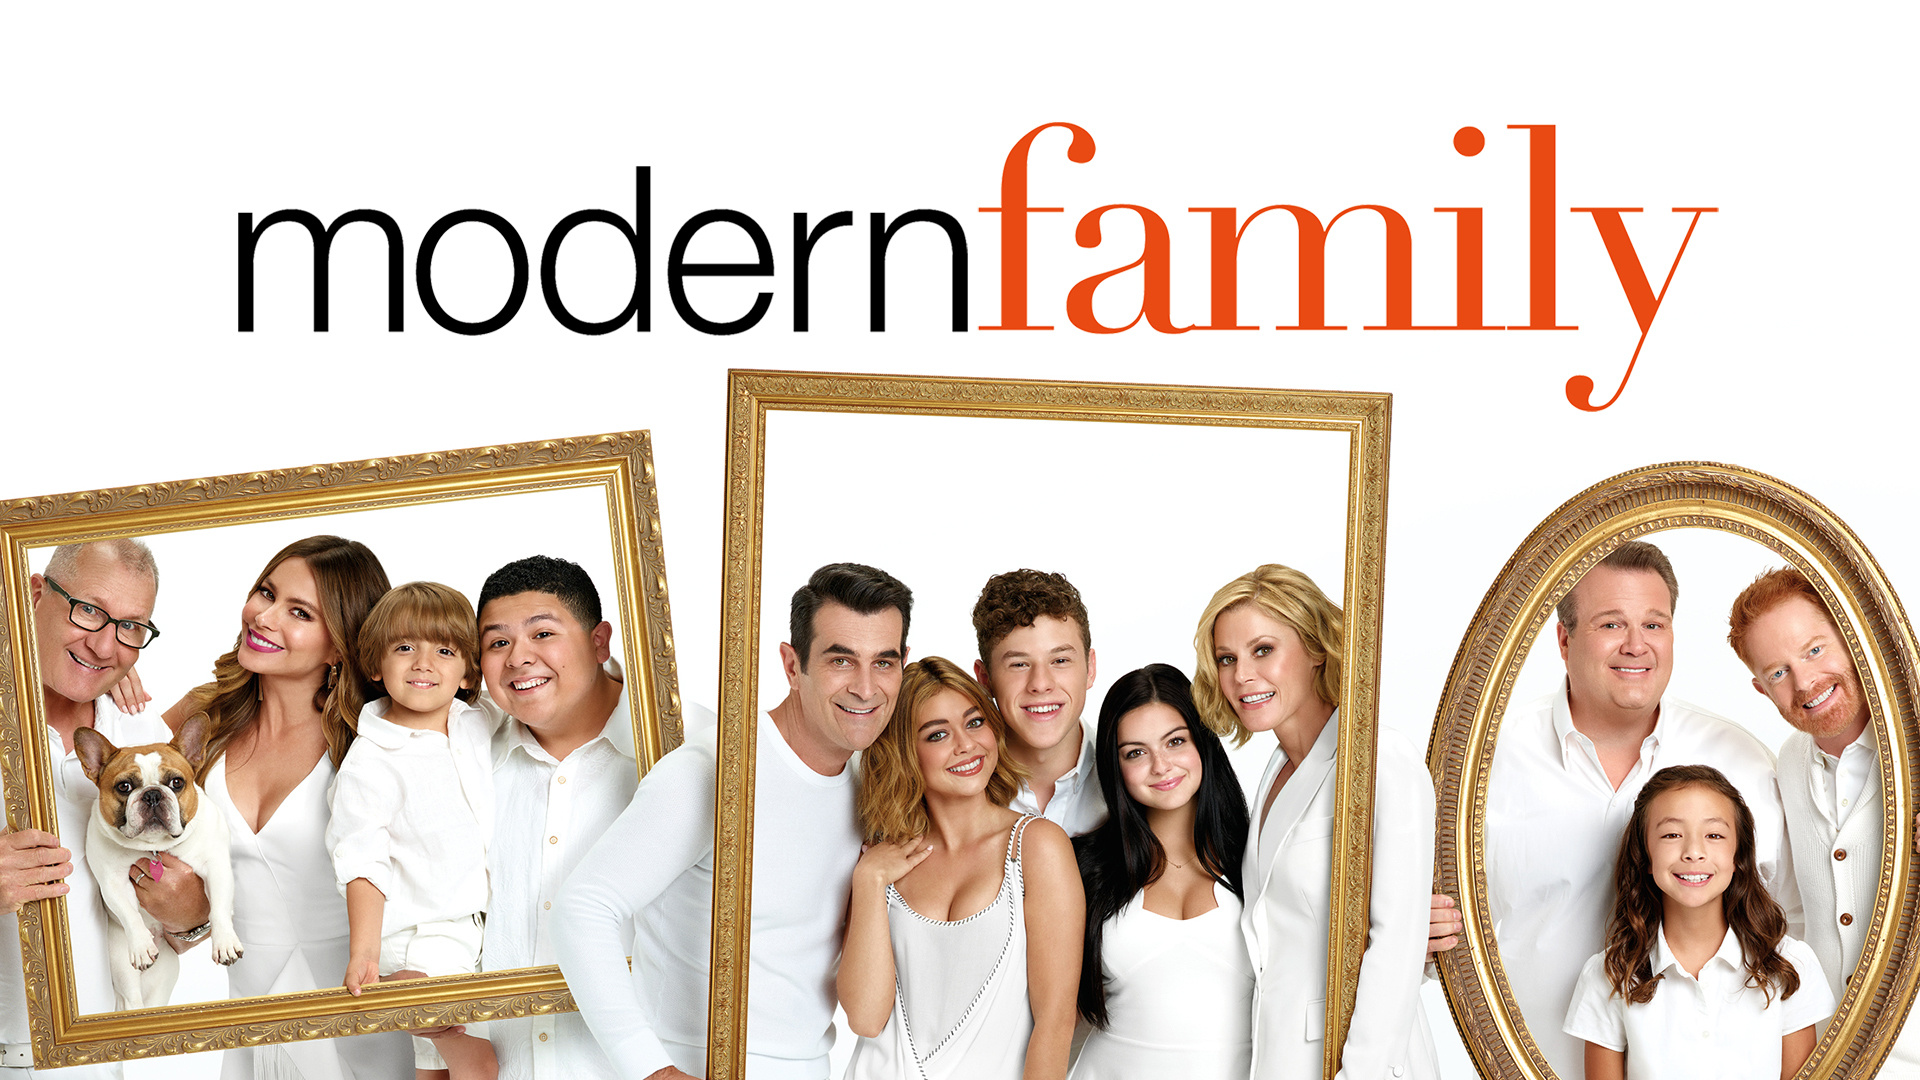 Modern Family, Ultimate trivia challenge, Test your knowledge, Iconic moments, 1920x1080 Full HD Desktop